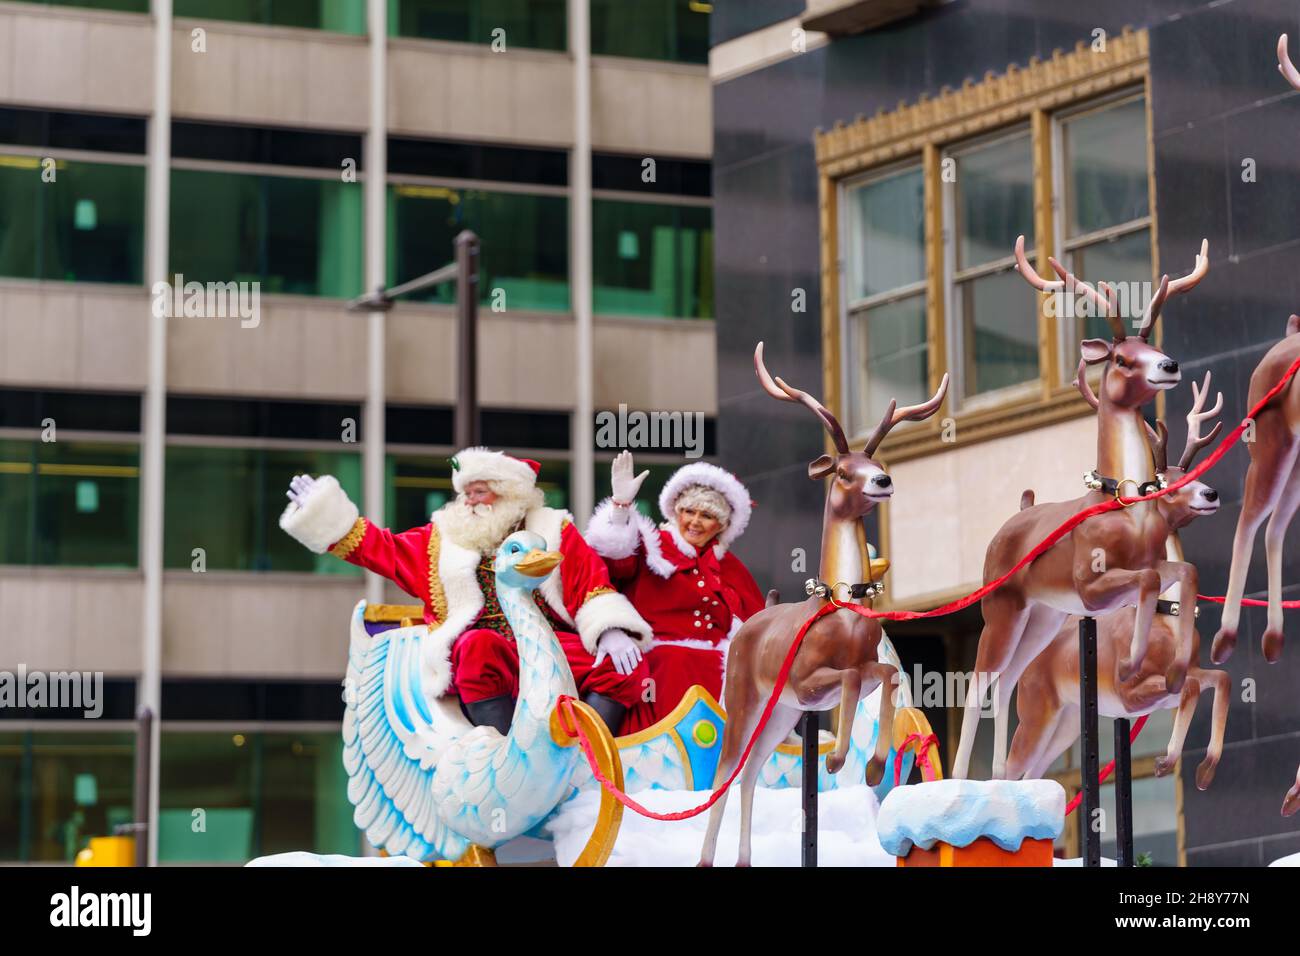 Philadelphia, PA, USA - November 25, 2021: Mr. and Mrs. Santa Claus on a float in the 102nd annual Thanksgiving Day Parade. Stock Photo